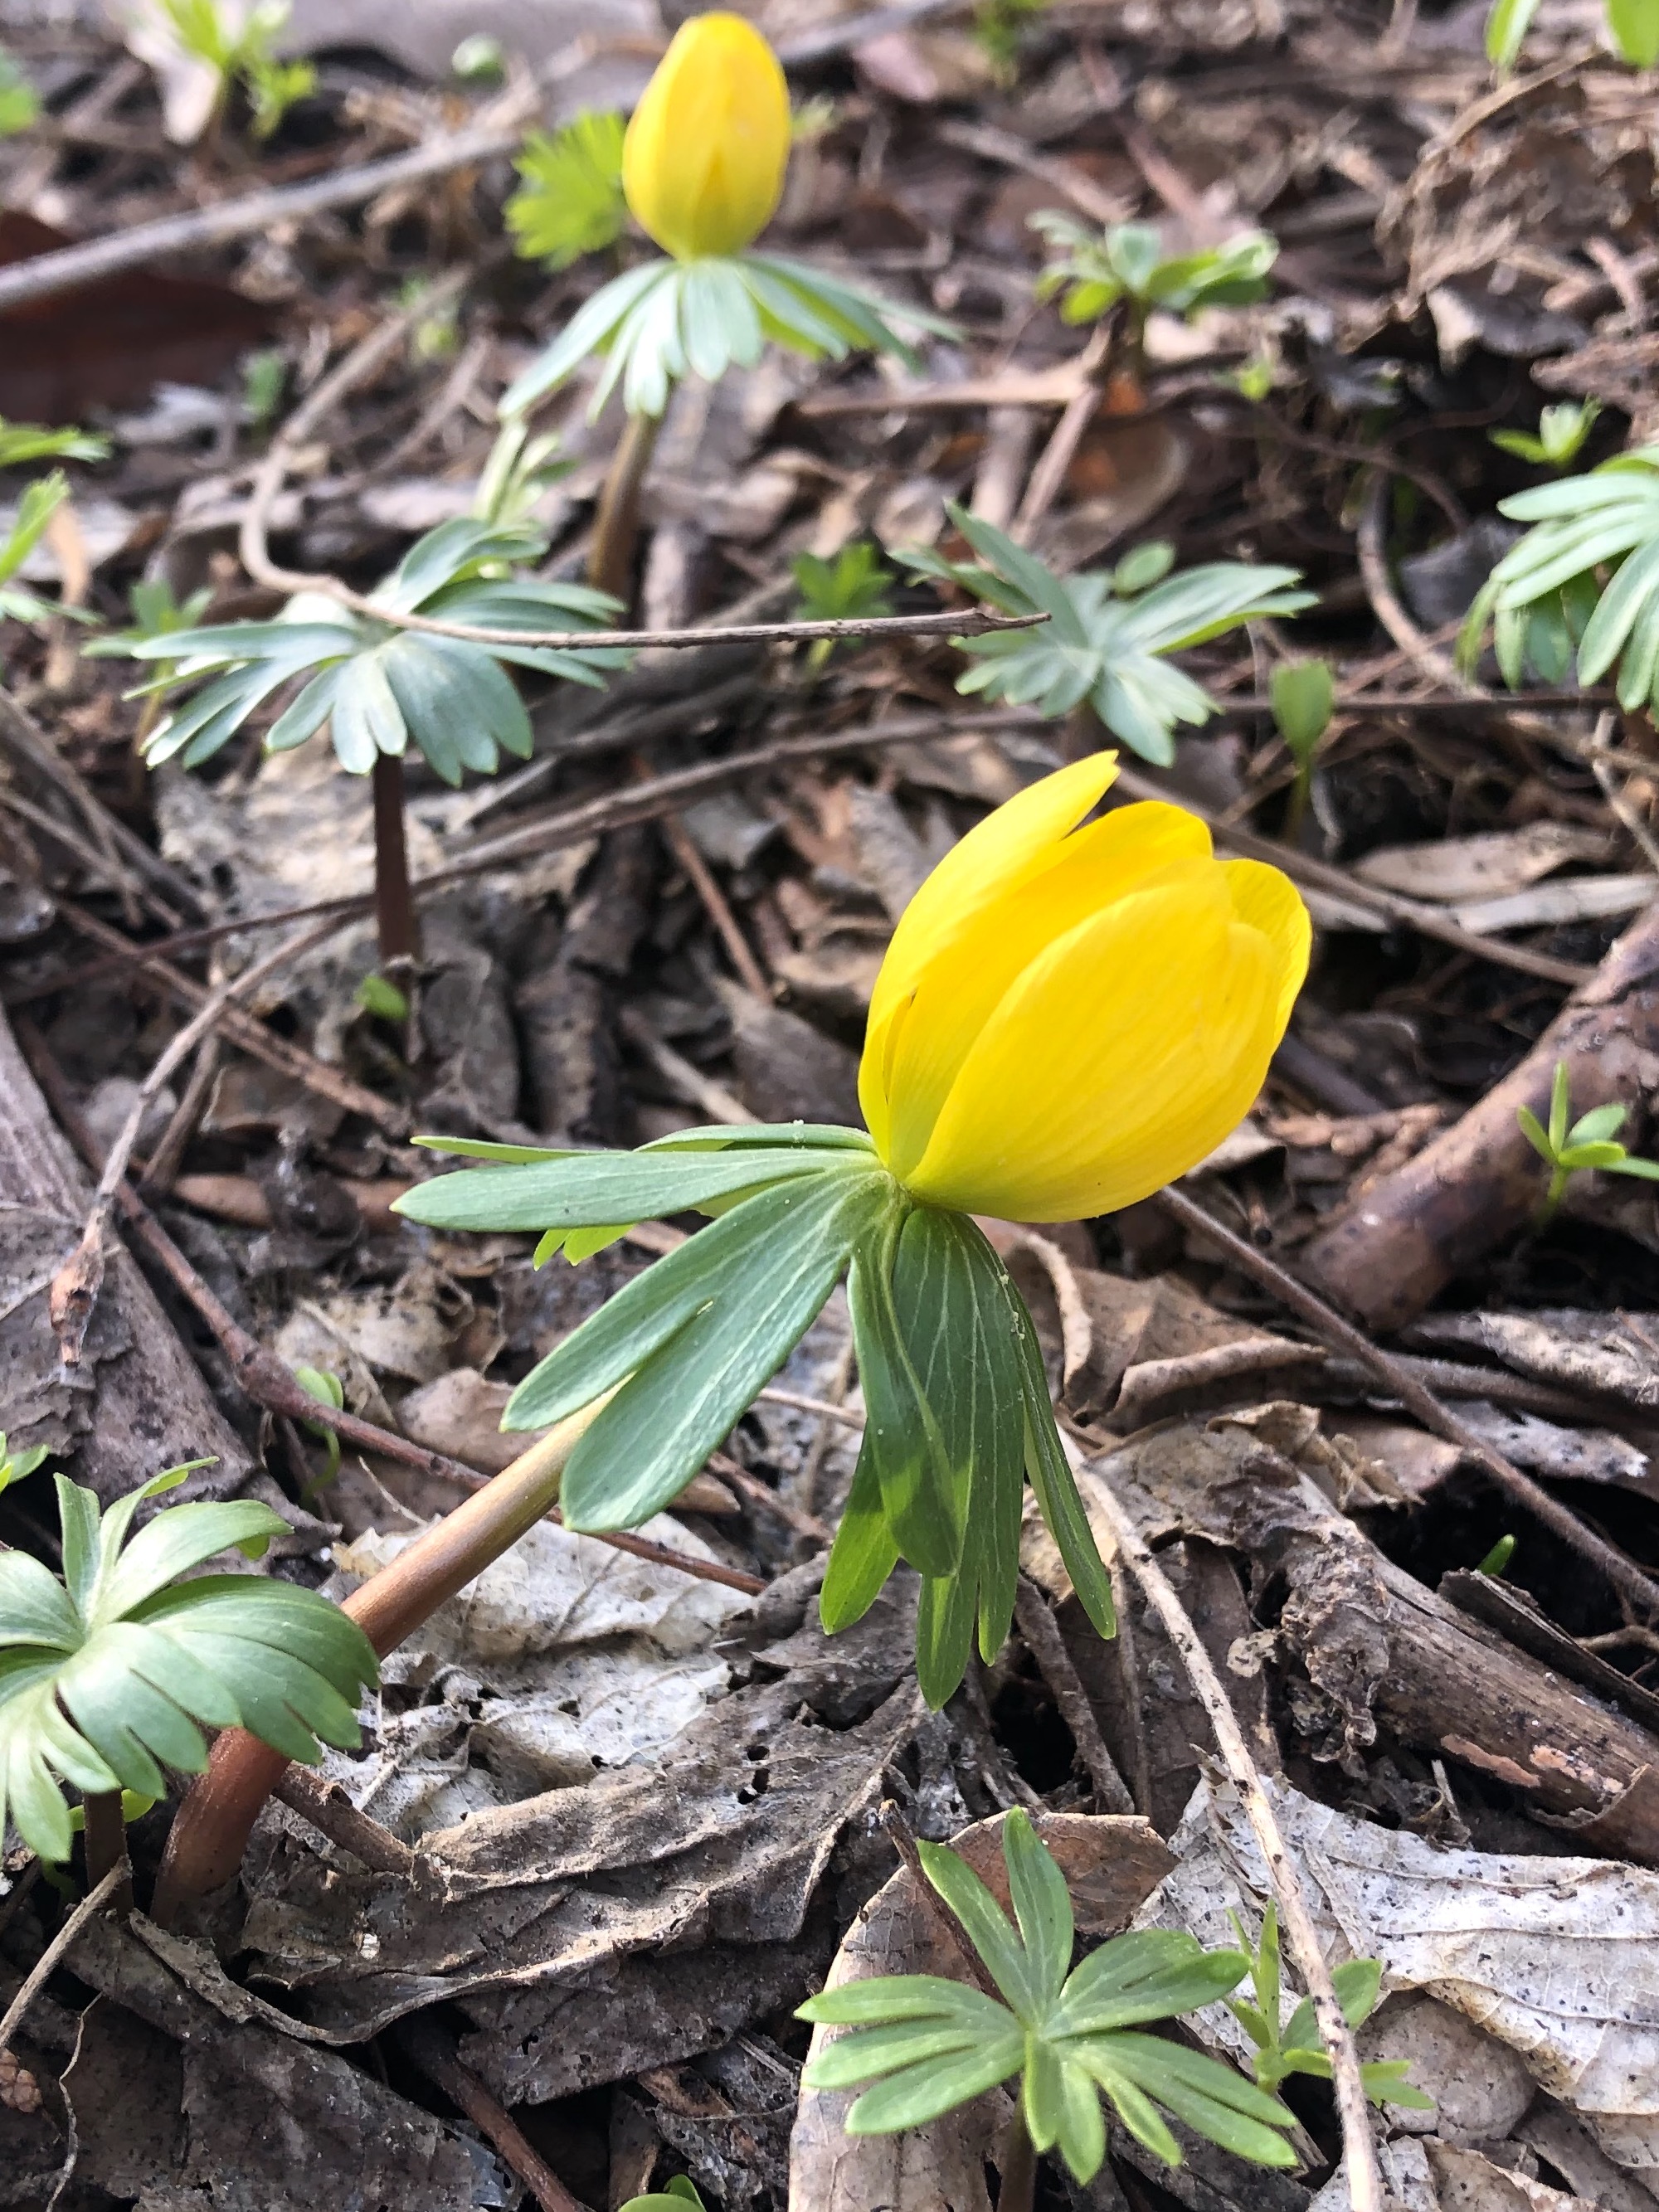 Winter Aconite in yard near the Duck Pond on March 13, 2021.